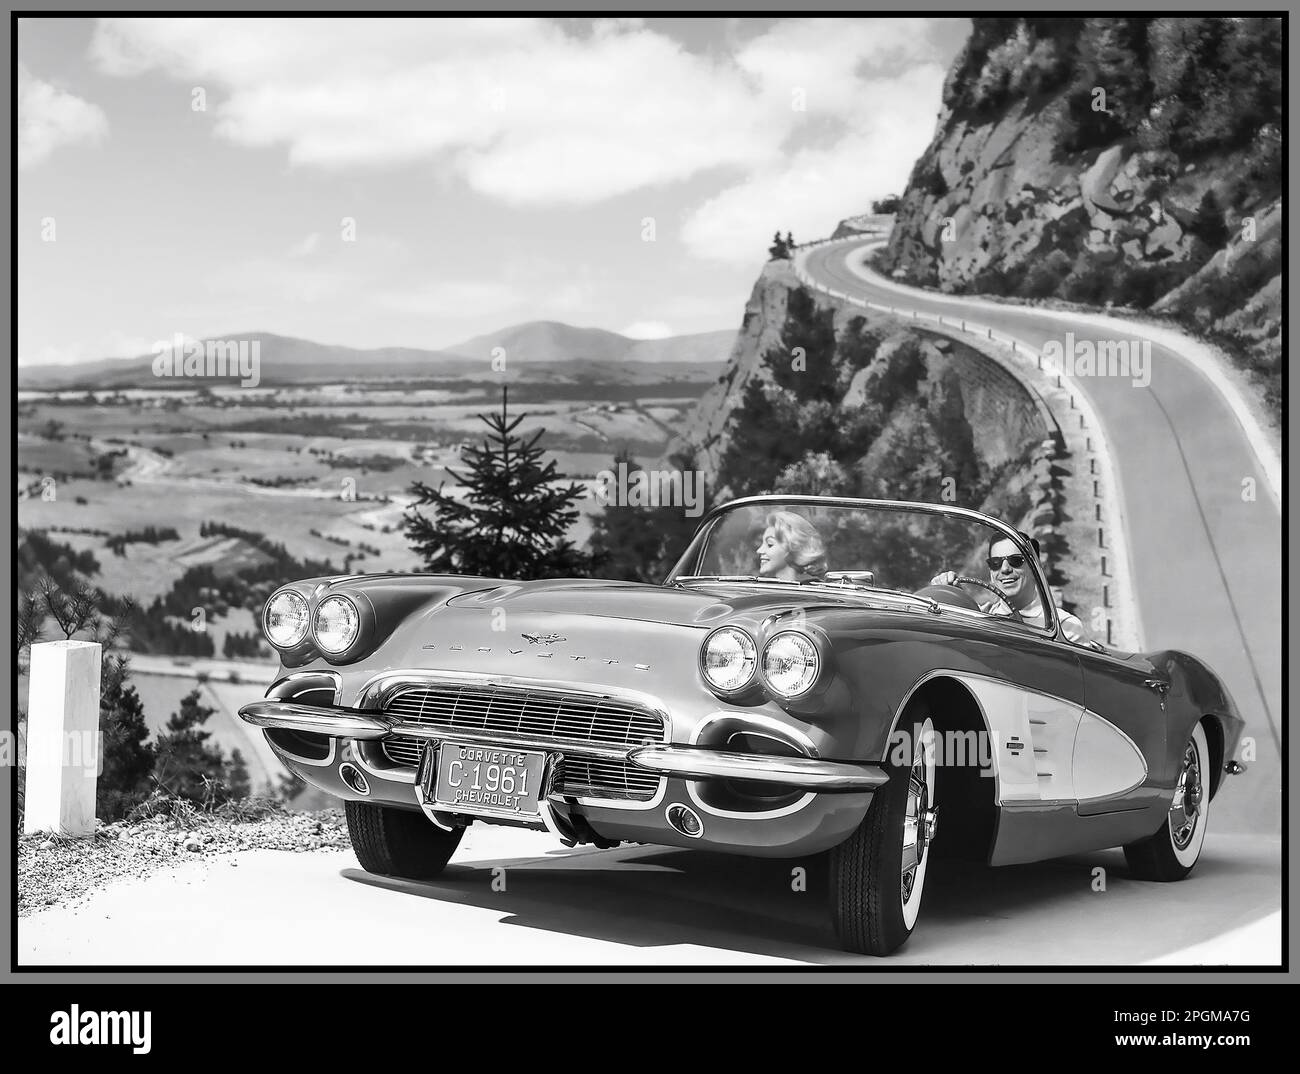 1960s Chevrolet Corvette 1961 open top 2 seater sports car motorcar product image photograph with model in outdoor winding mountainous road lifestyle fashion situation Stock Photo